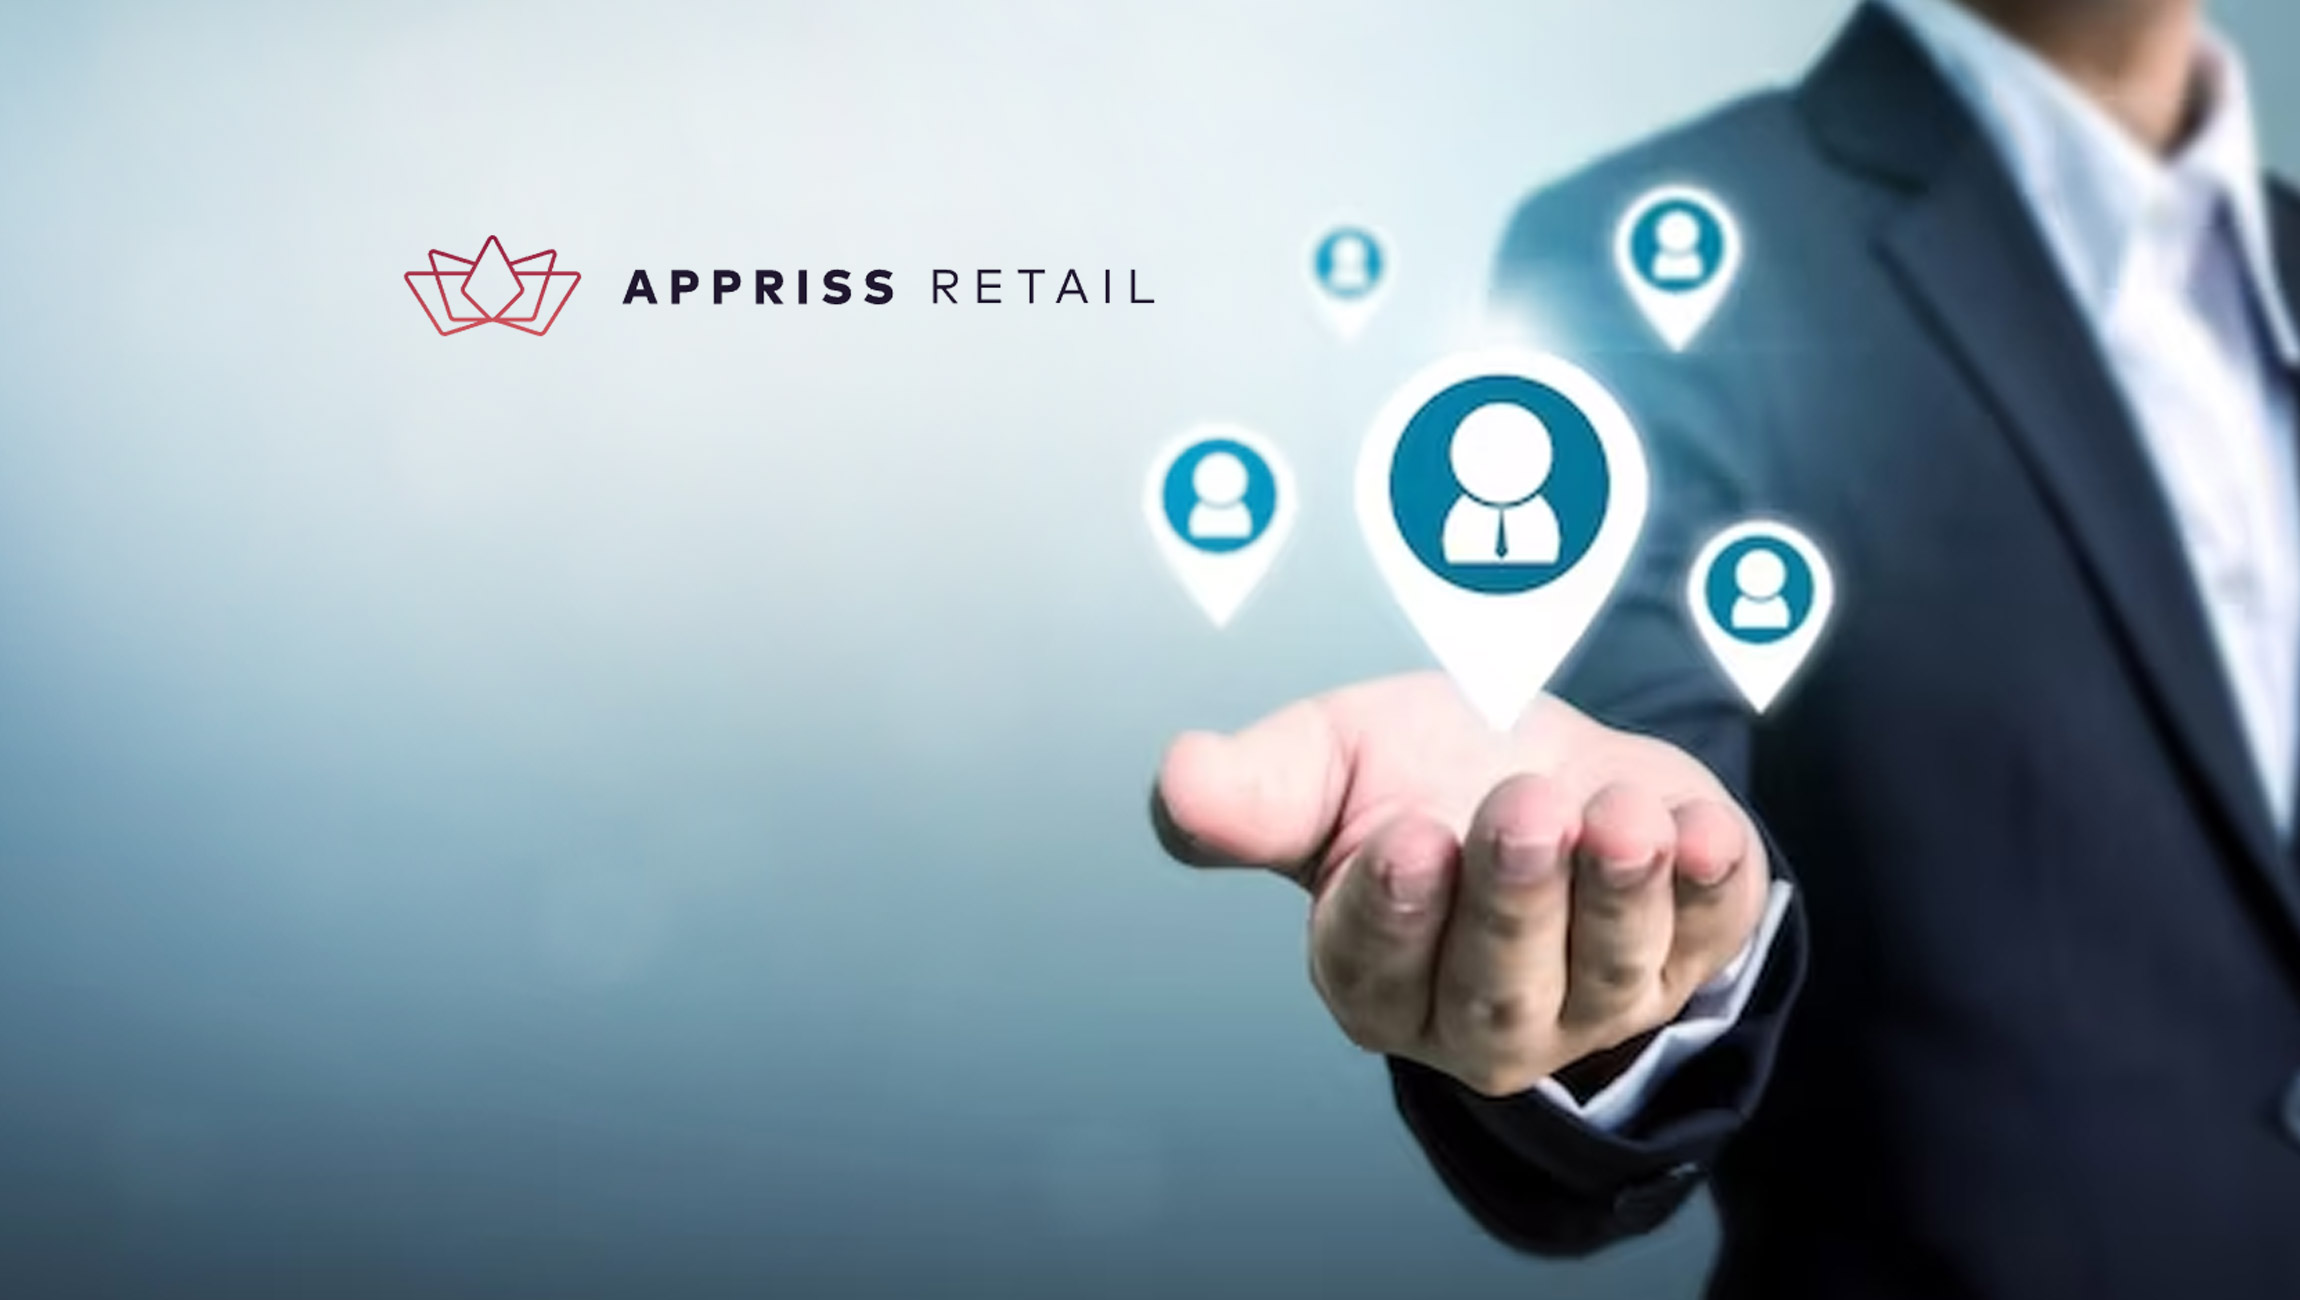 Appriss Retail Expands Its Leadership Team With Two New Hires Focused on Customer Success and Revenue Growth